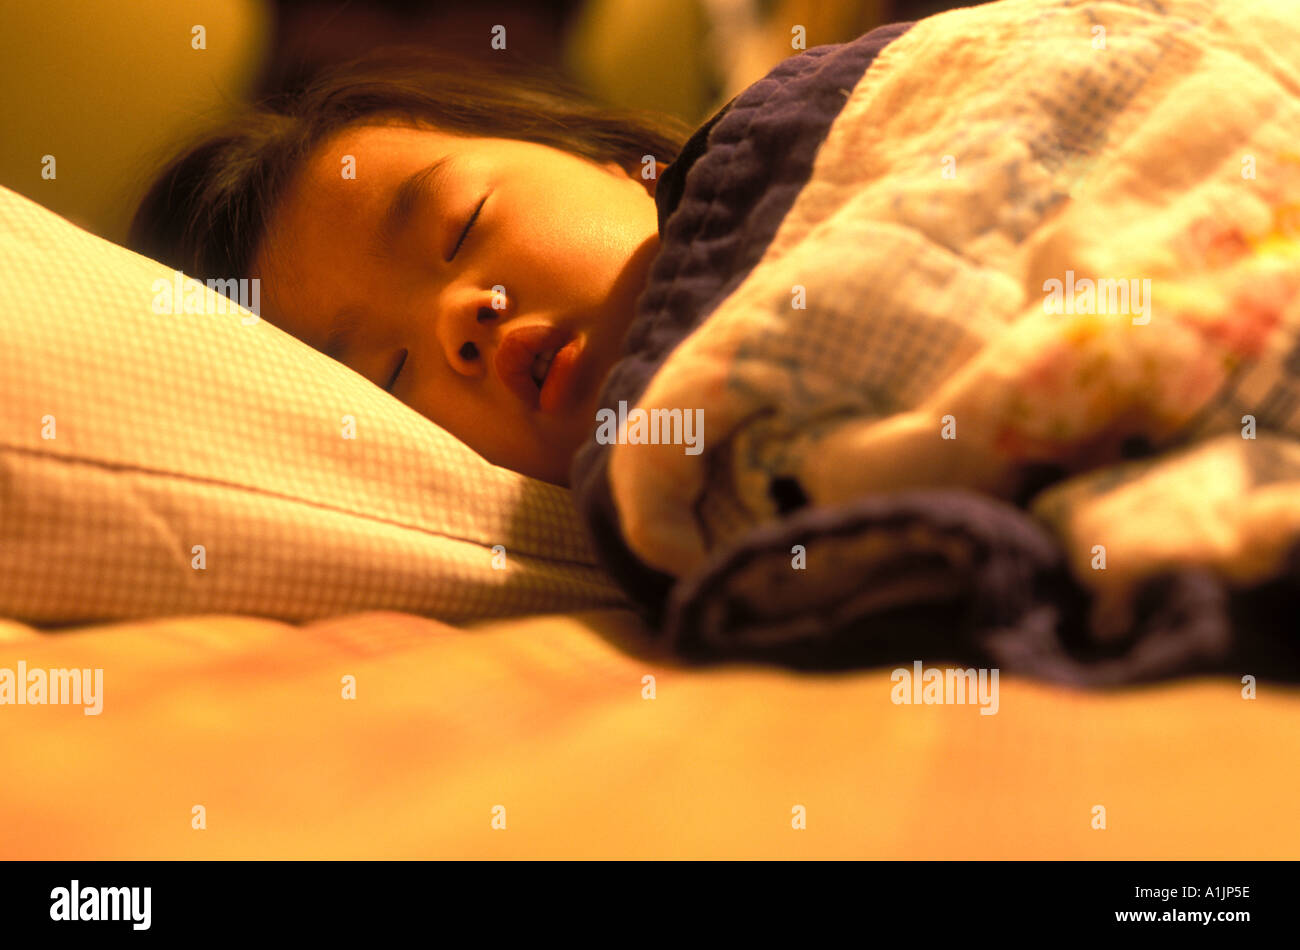 Young 3 or 4 year old Asian girl sleeping with a blanket Stock Photo